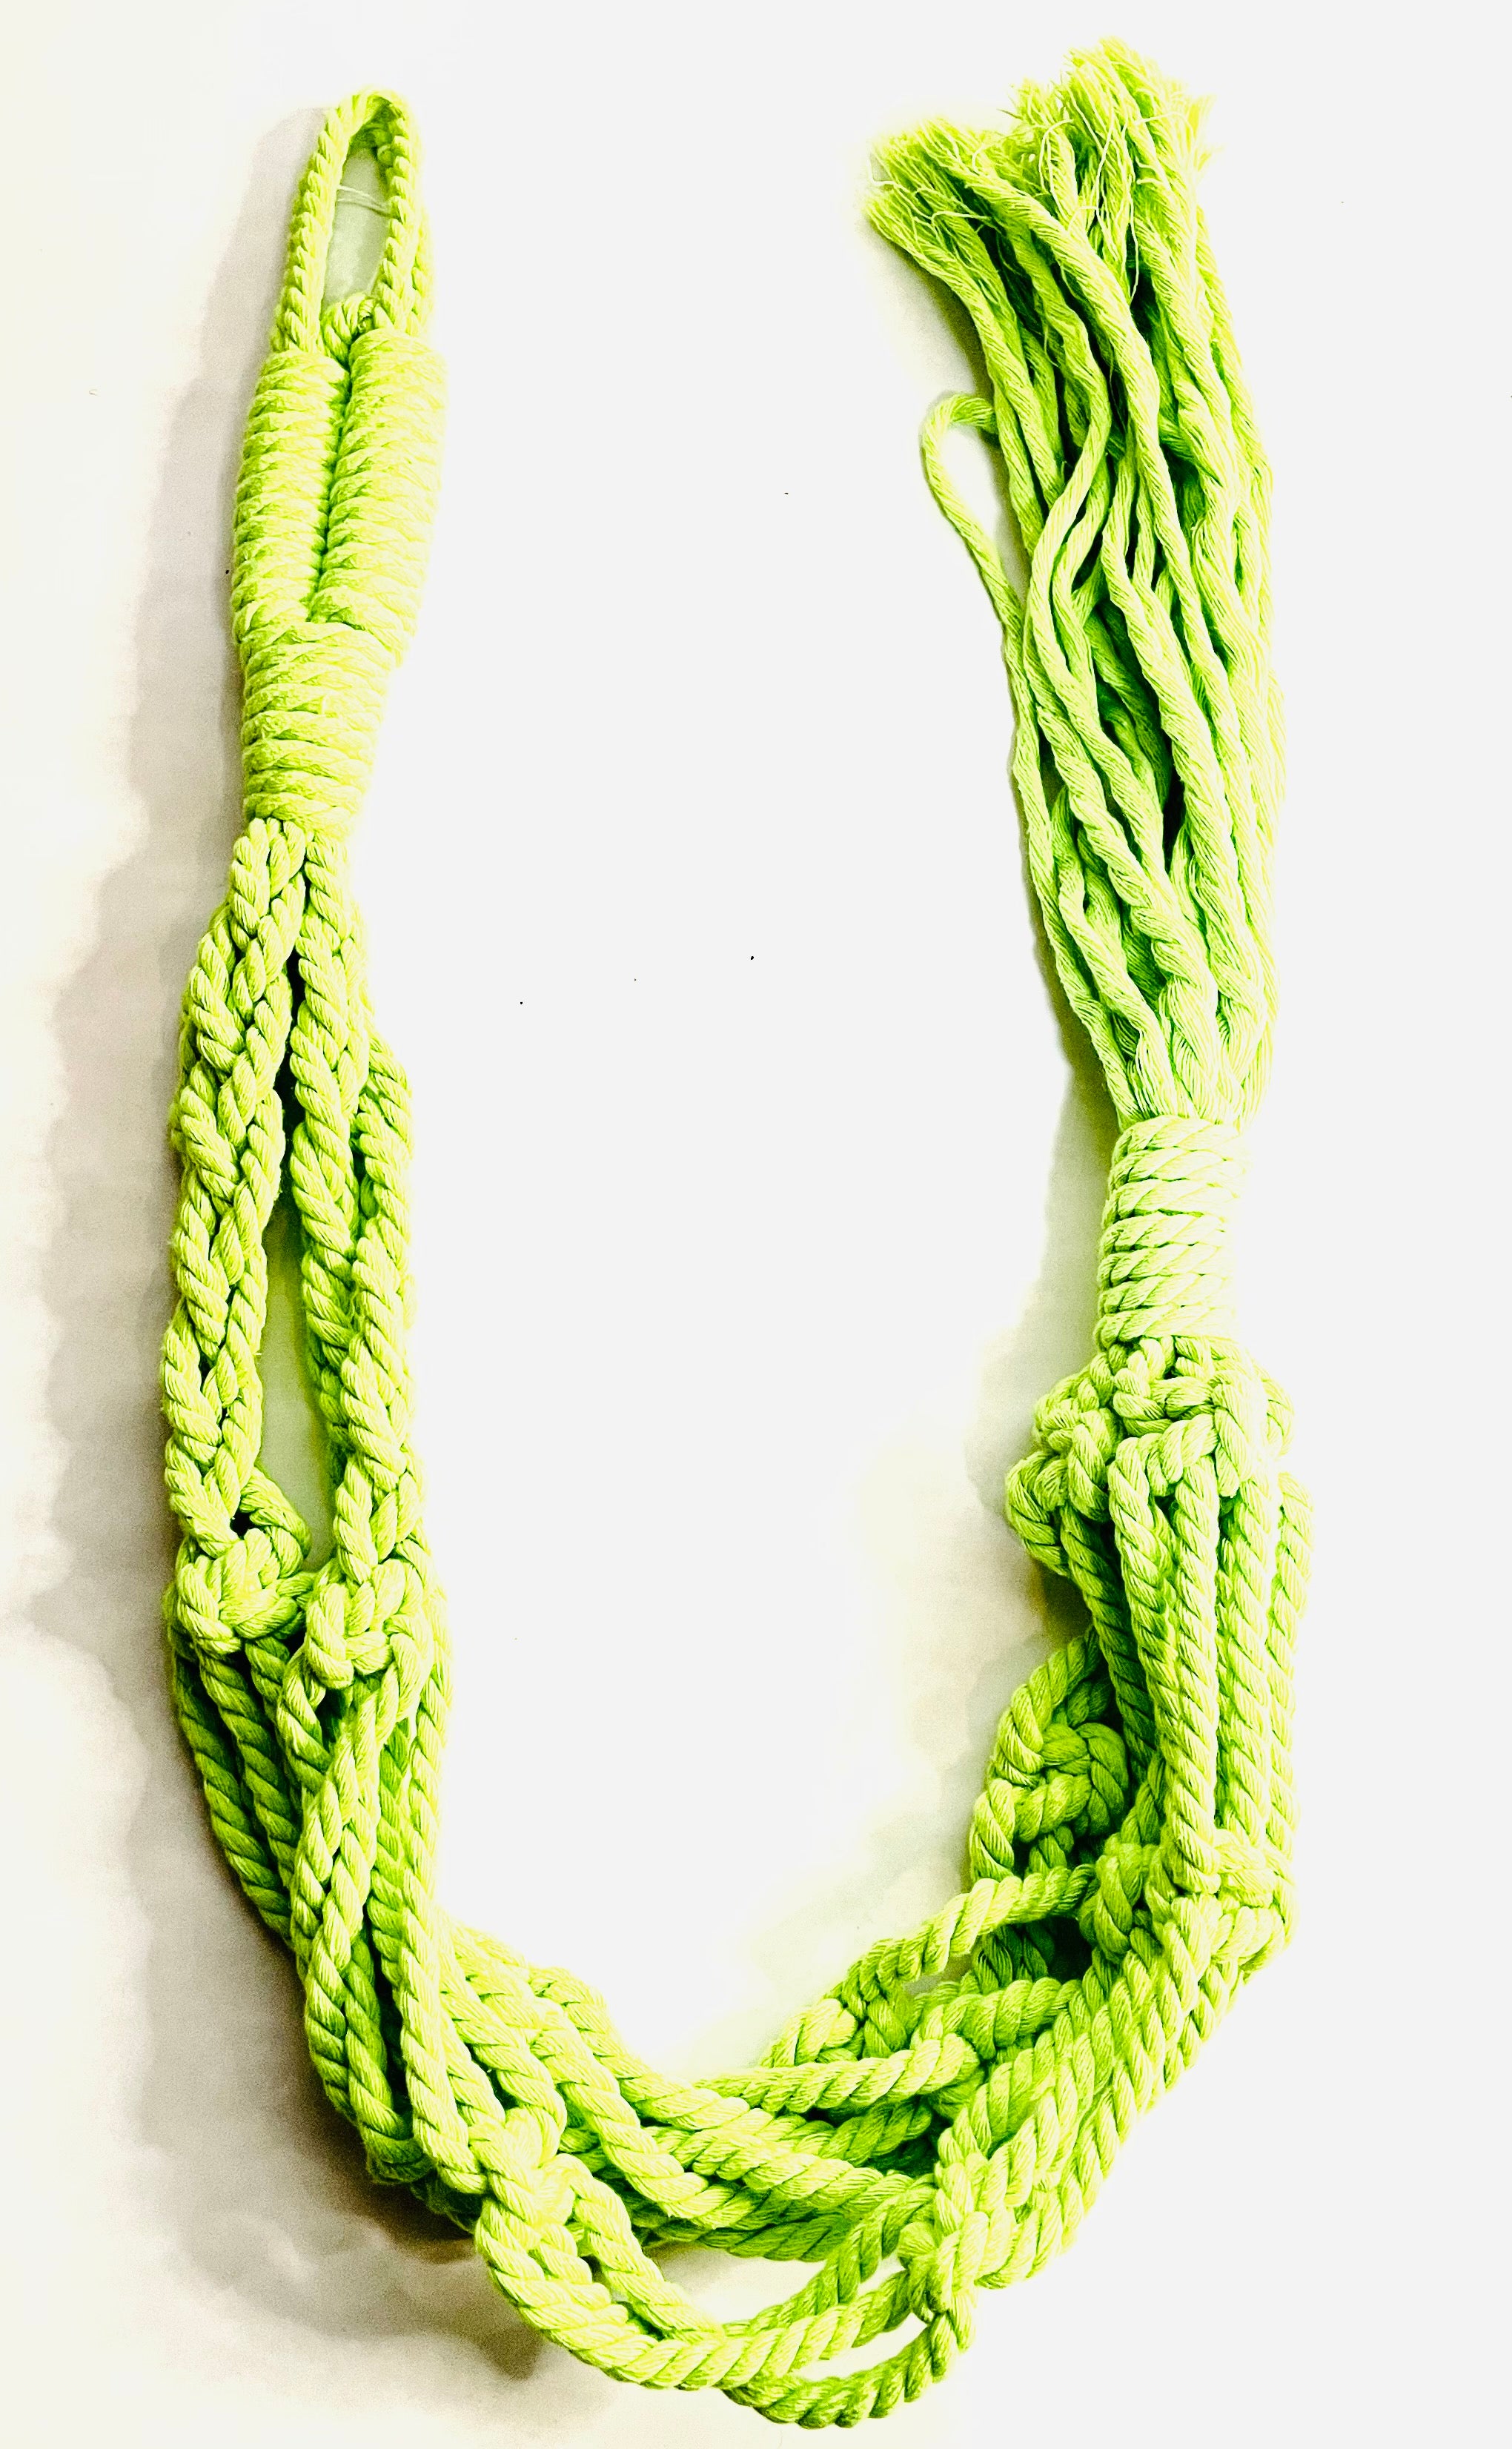 A macrame hanger lies in a U-shaped formation. The hanger is a bright highlighter green.